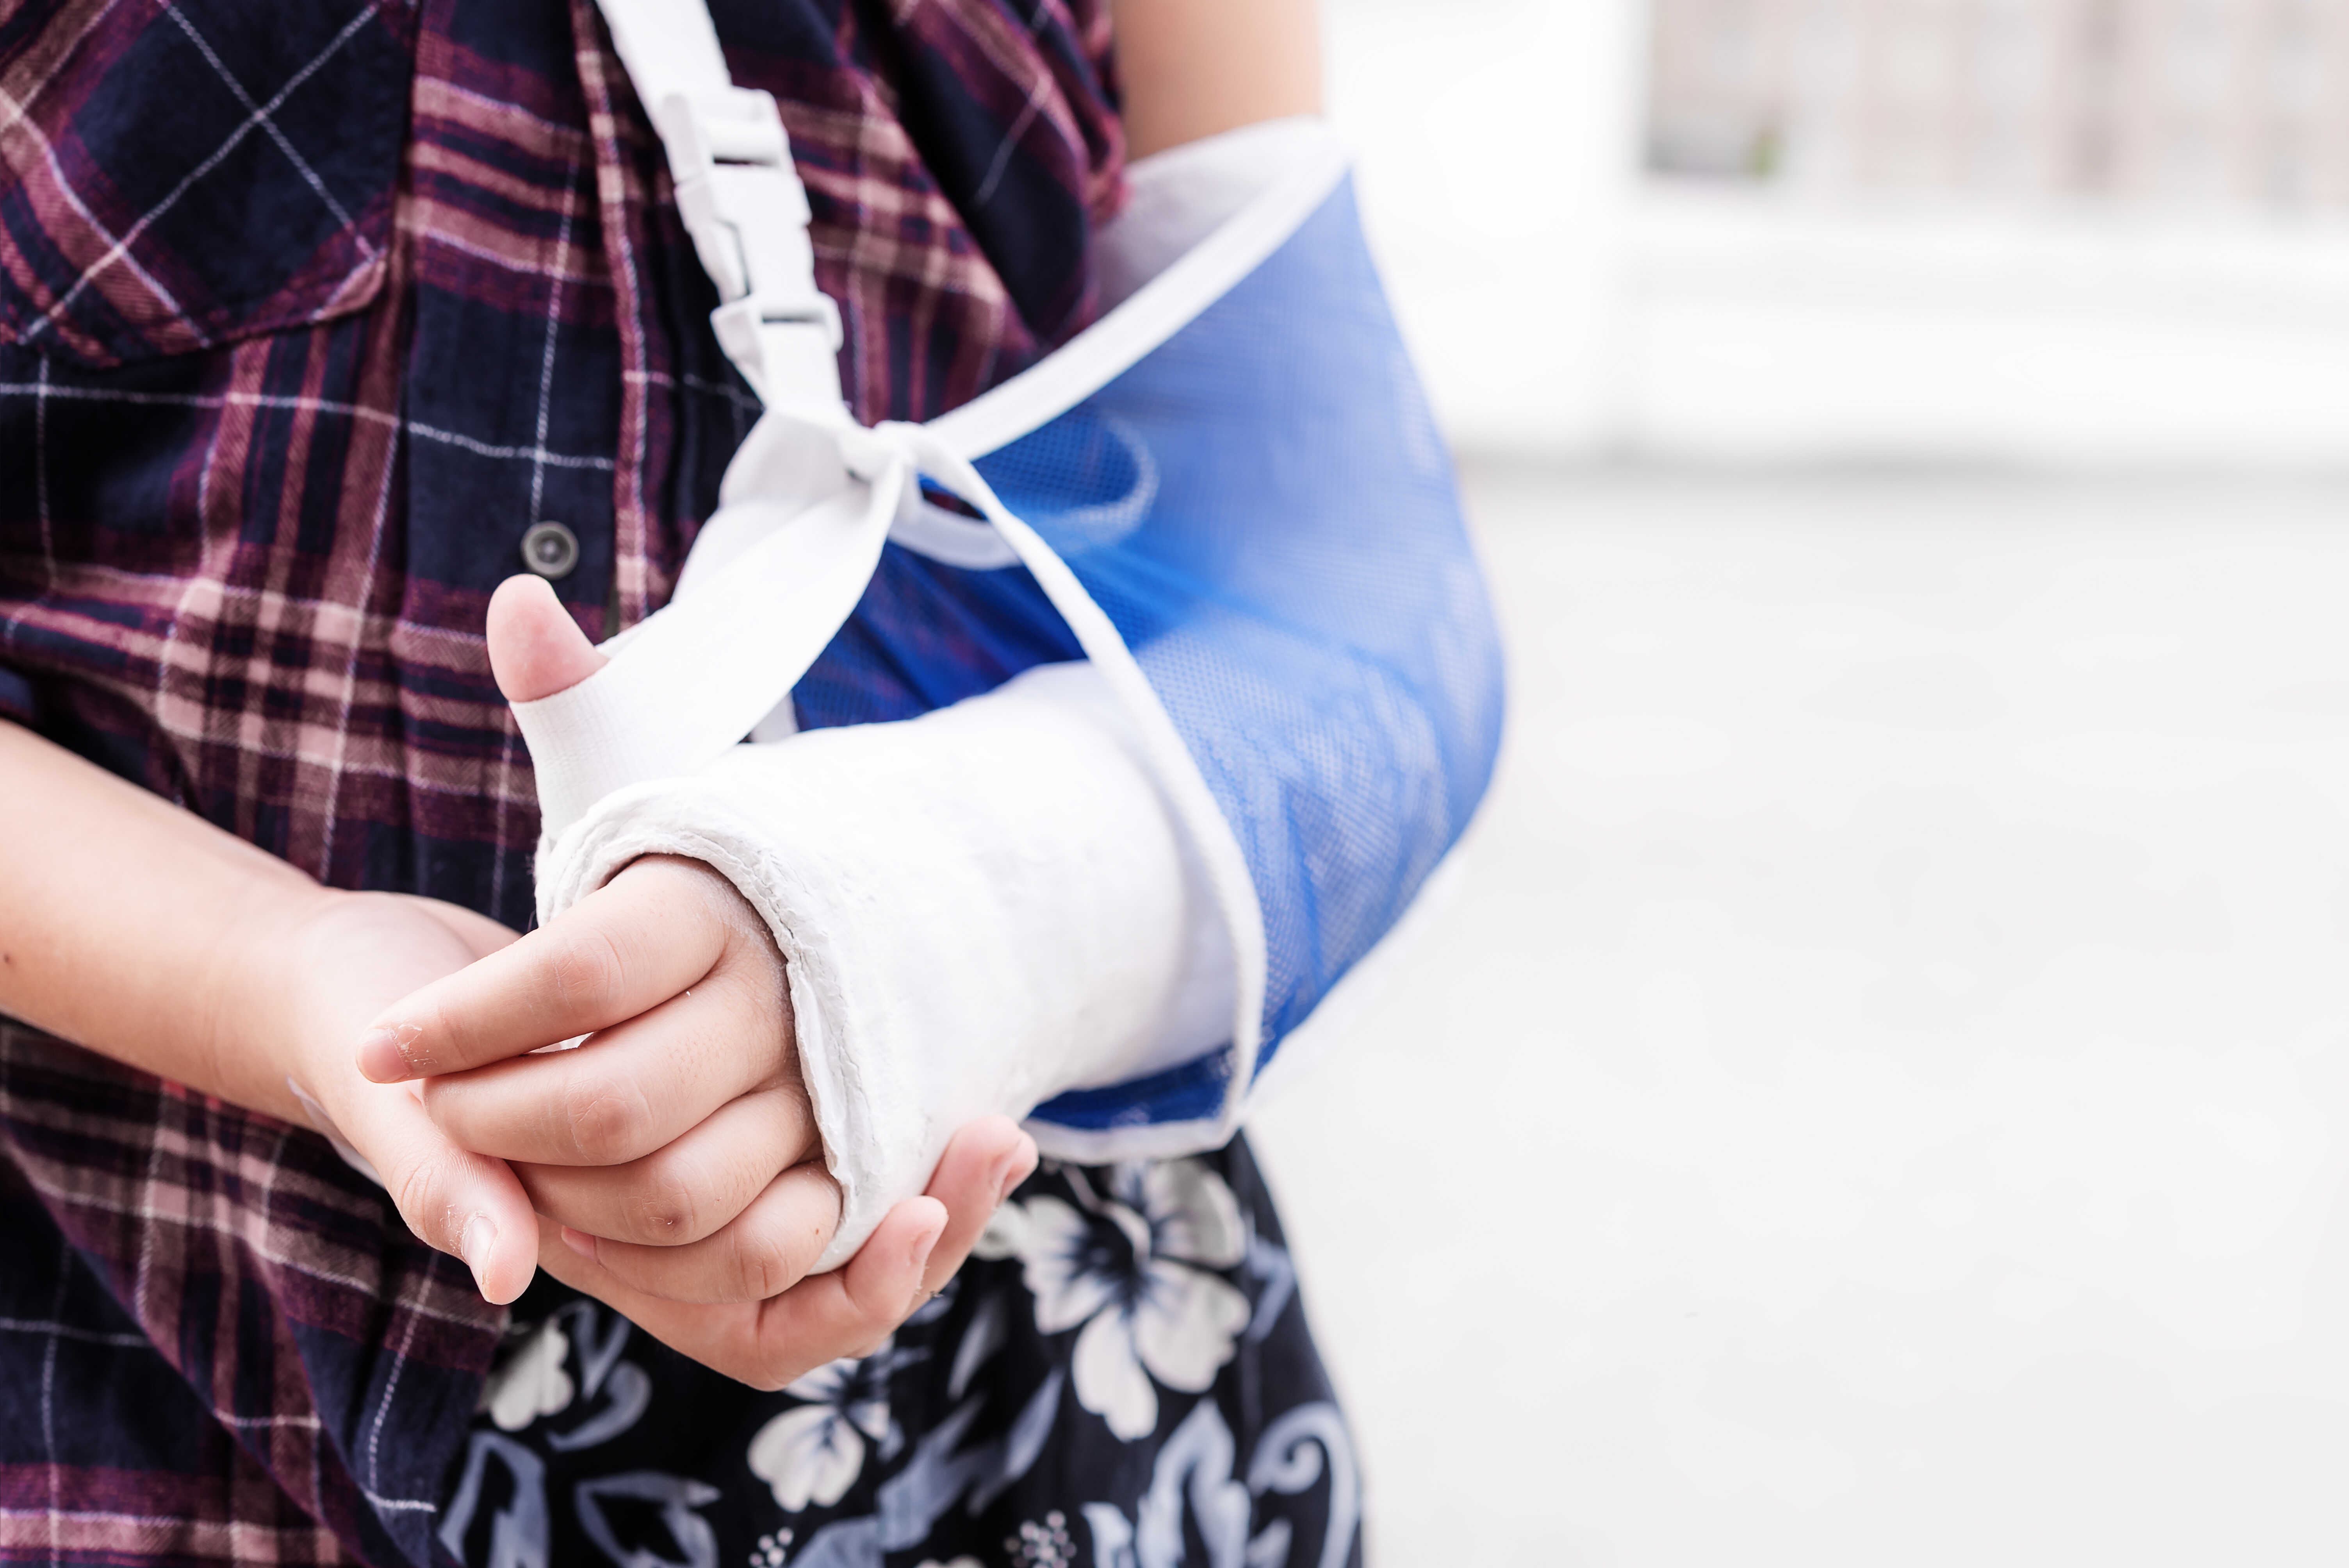 injured person with arm in a cast and sling